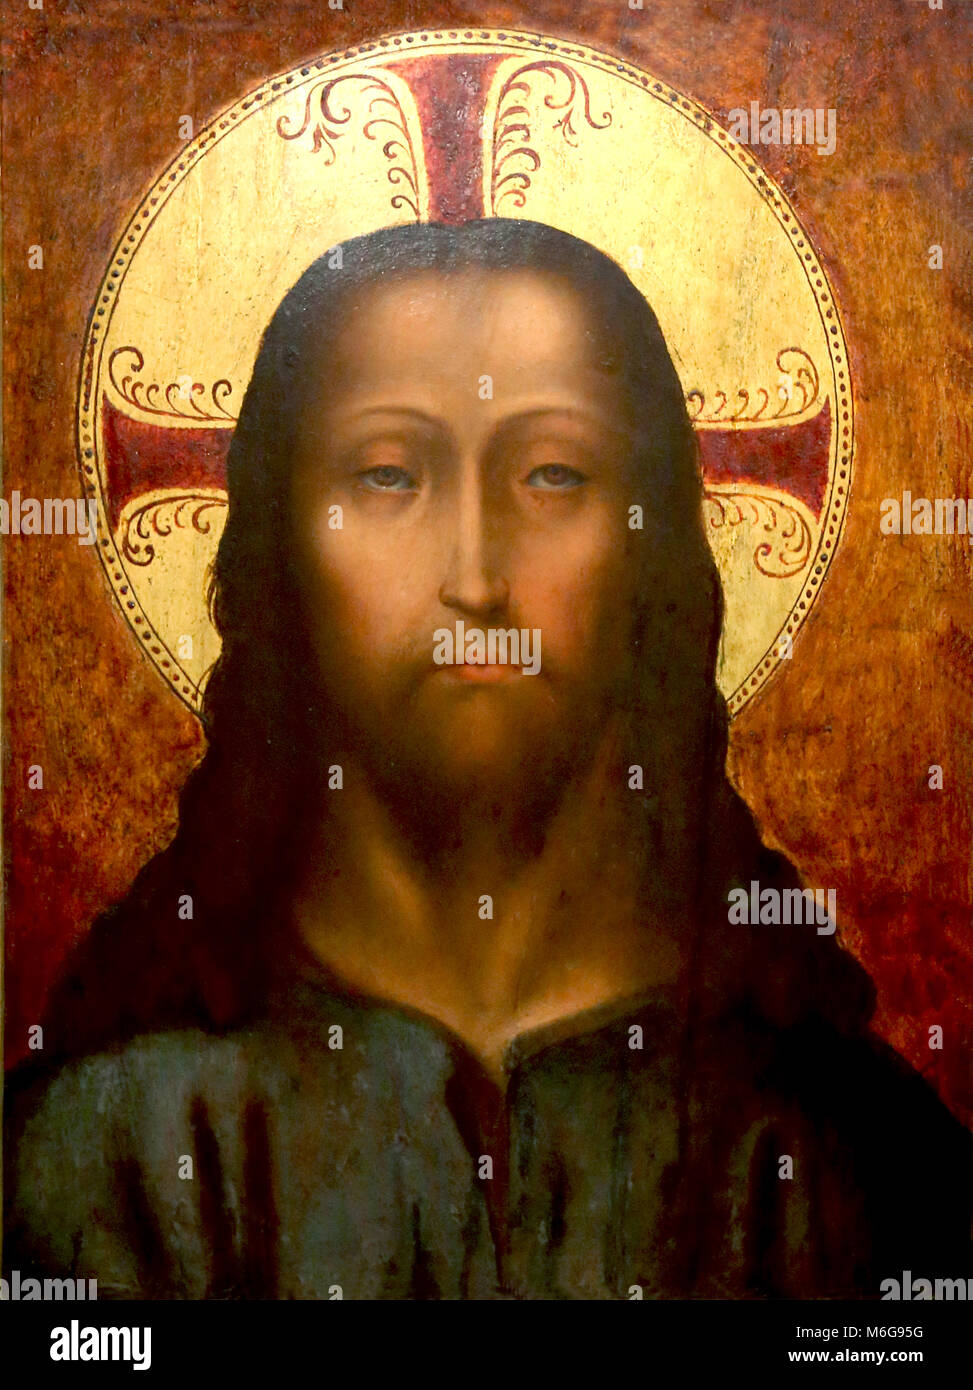 Holy face of Jesus, painted about 1501-1510 in Portugal. Oil on wood that came from the Cathedral of Funchal, Madeira. Unknown author. Stock Photo